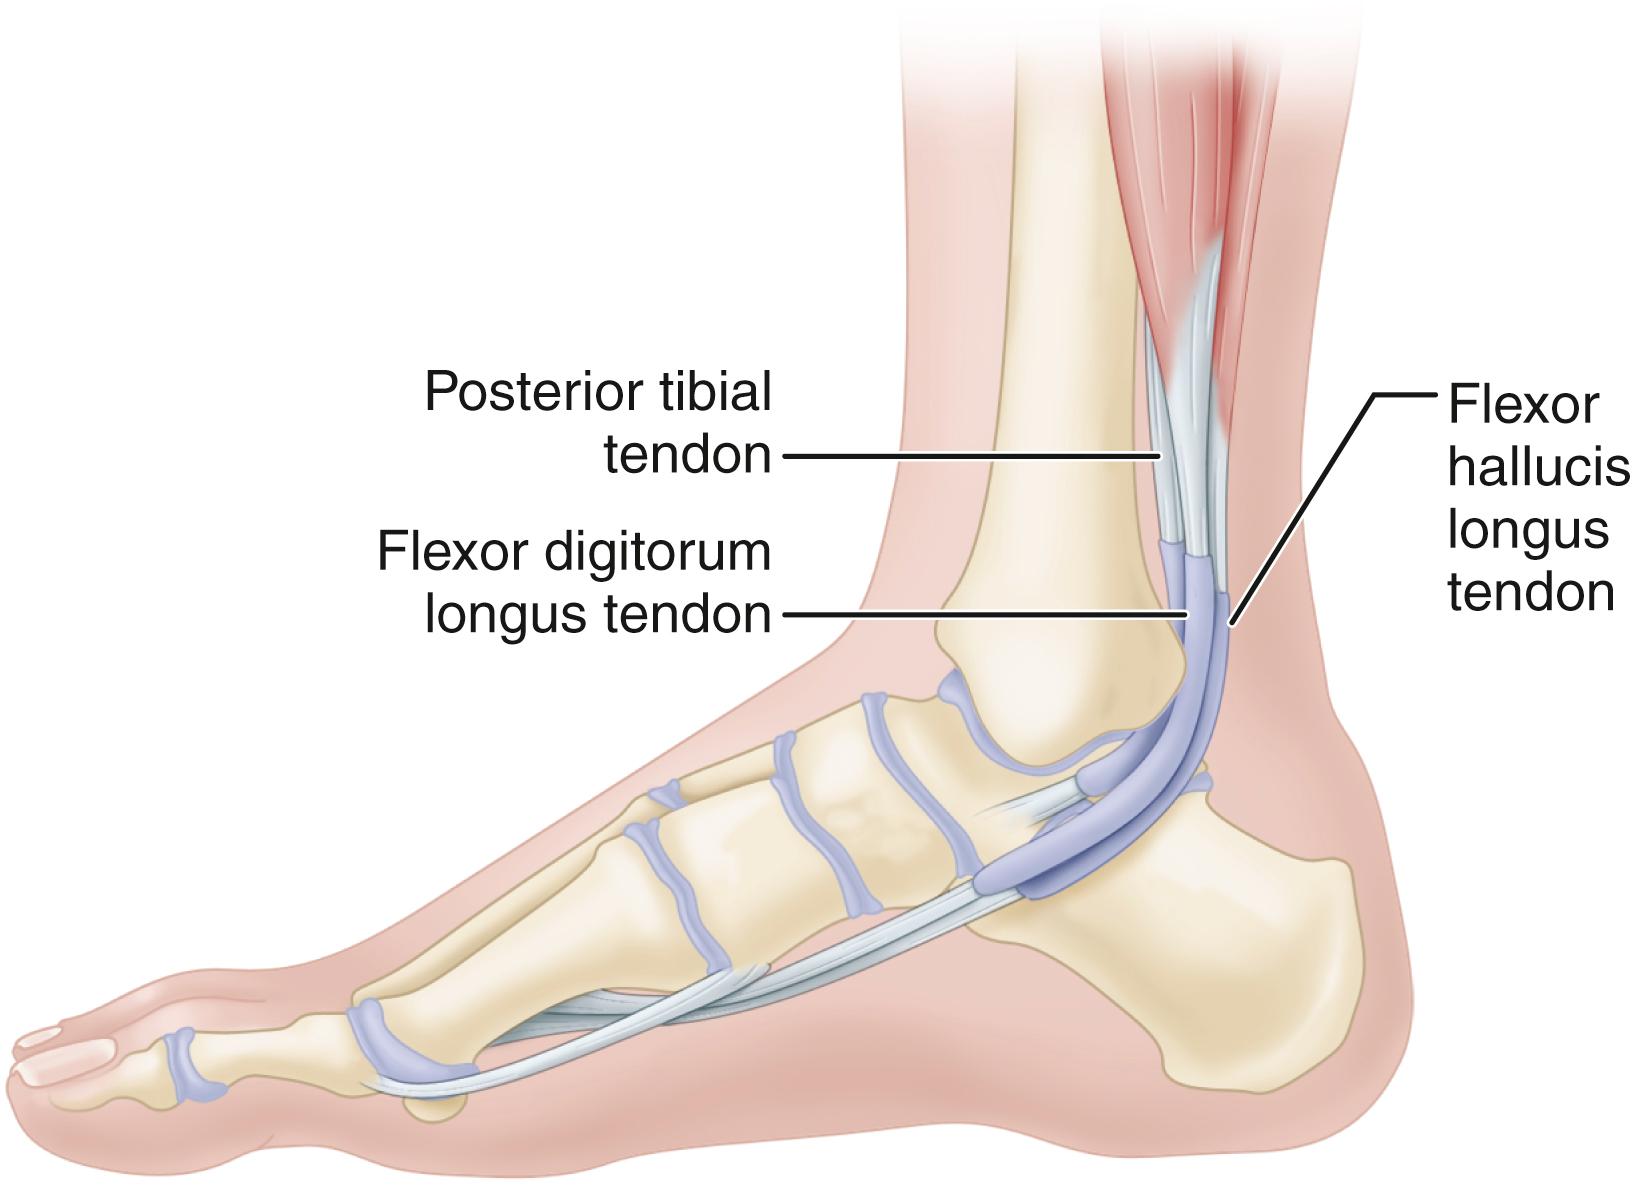 FIGURE 83.22, Technique for tendon transfer. Incision starts just behind musculotendinous border of posterior tibial tendon and courses behind medial malleolus to base of first metatarsal medially. SEE TECHNIQUE 83.2.